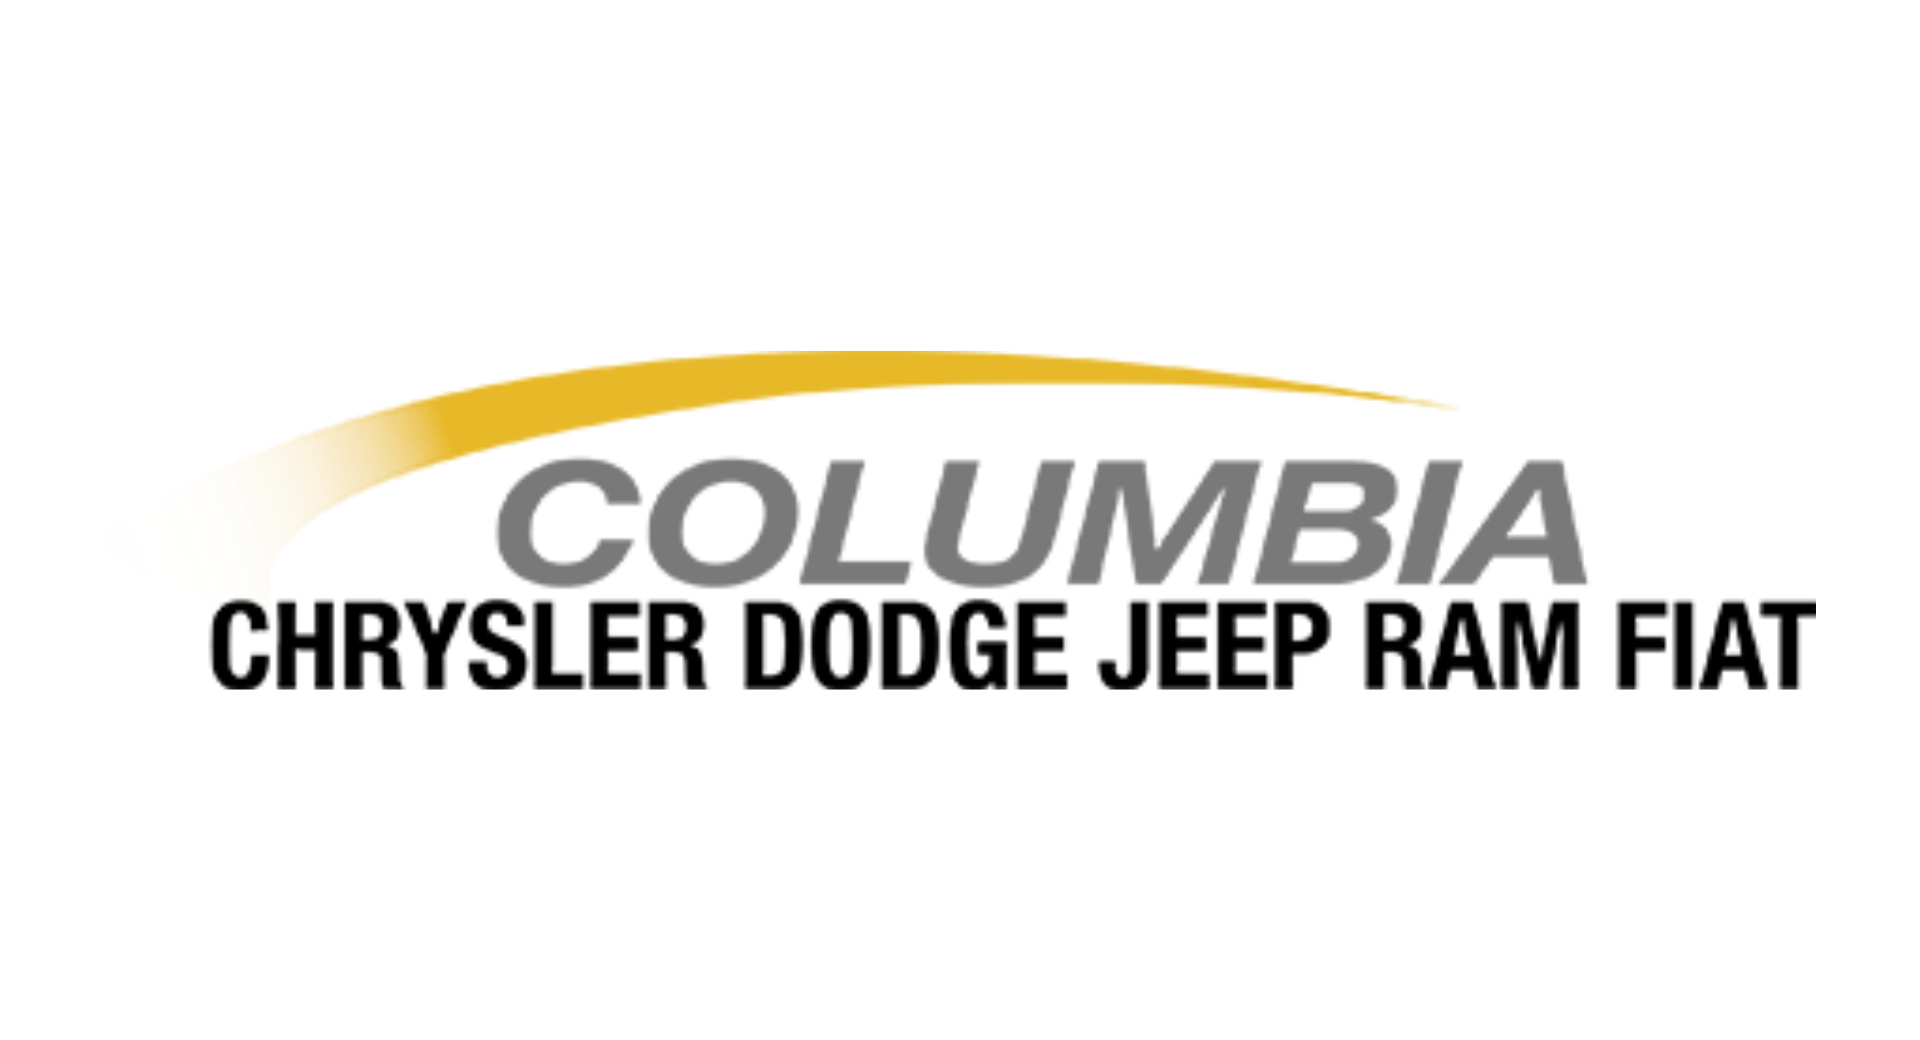 Columbia CDJRF is a Certified Agriculture Dealership.